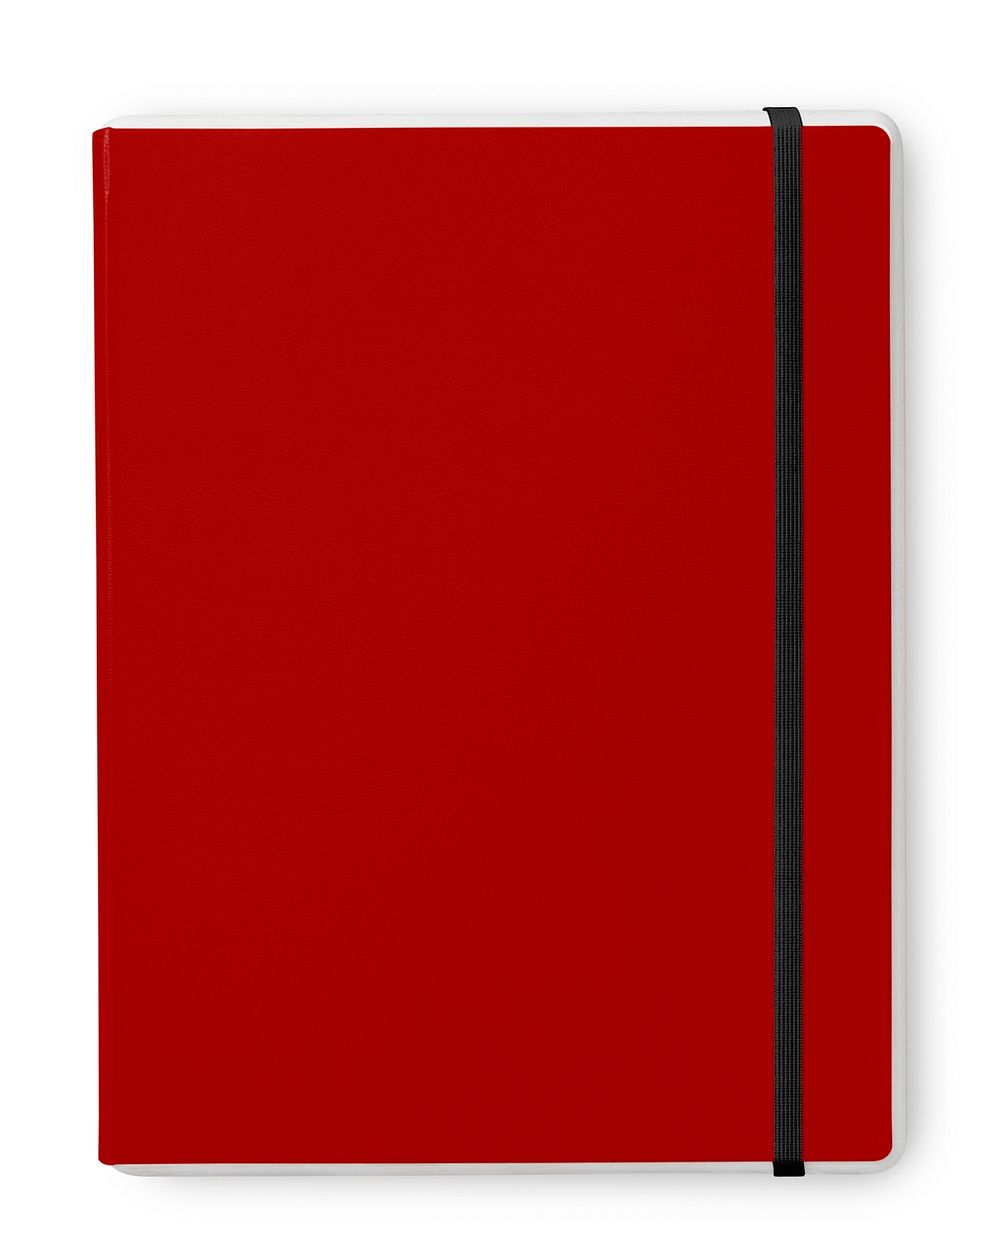 Notebook cover mockup, red design psd